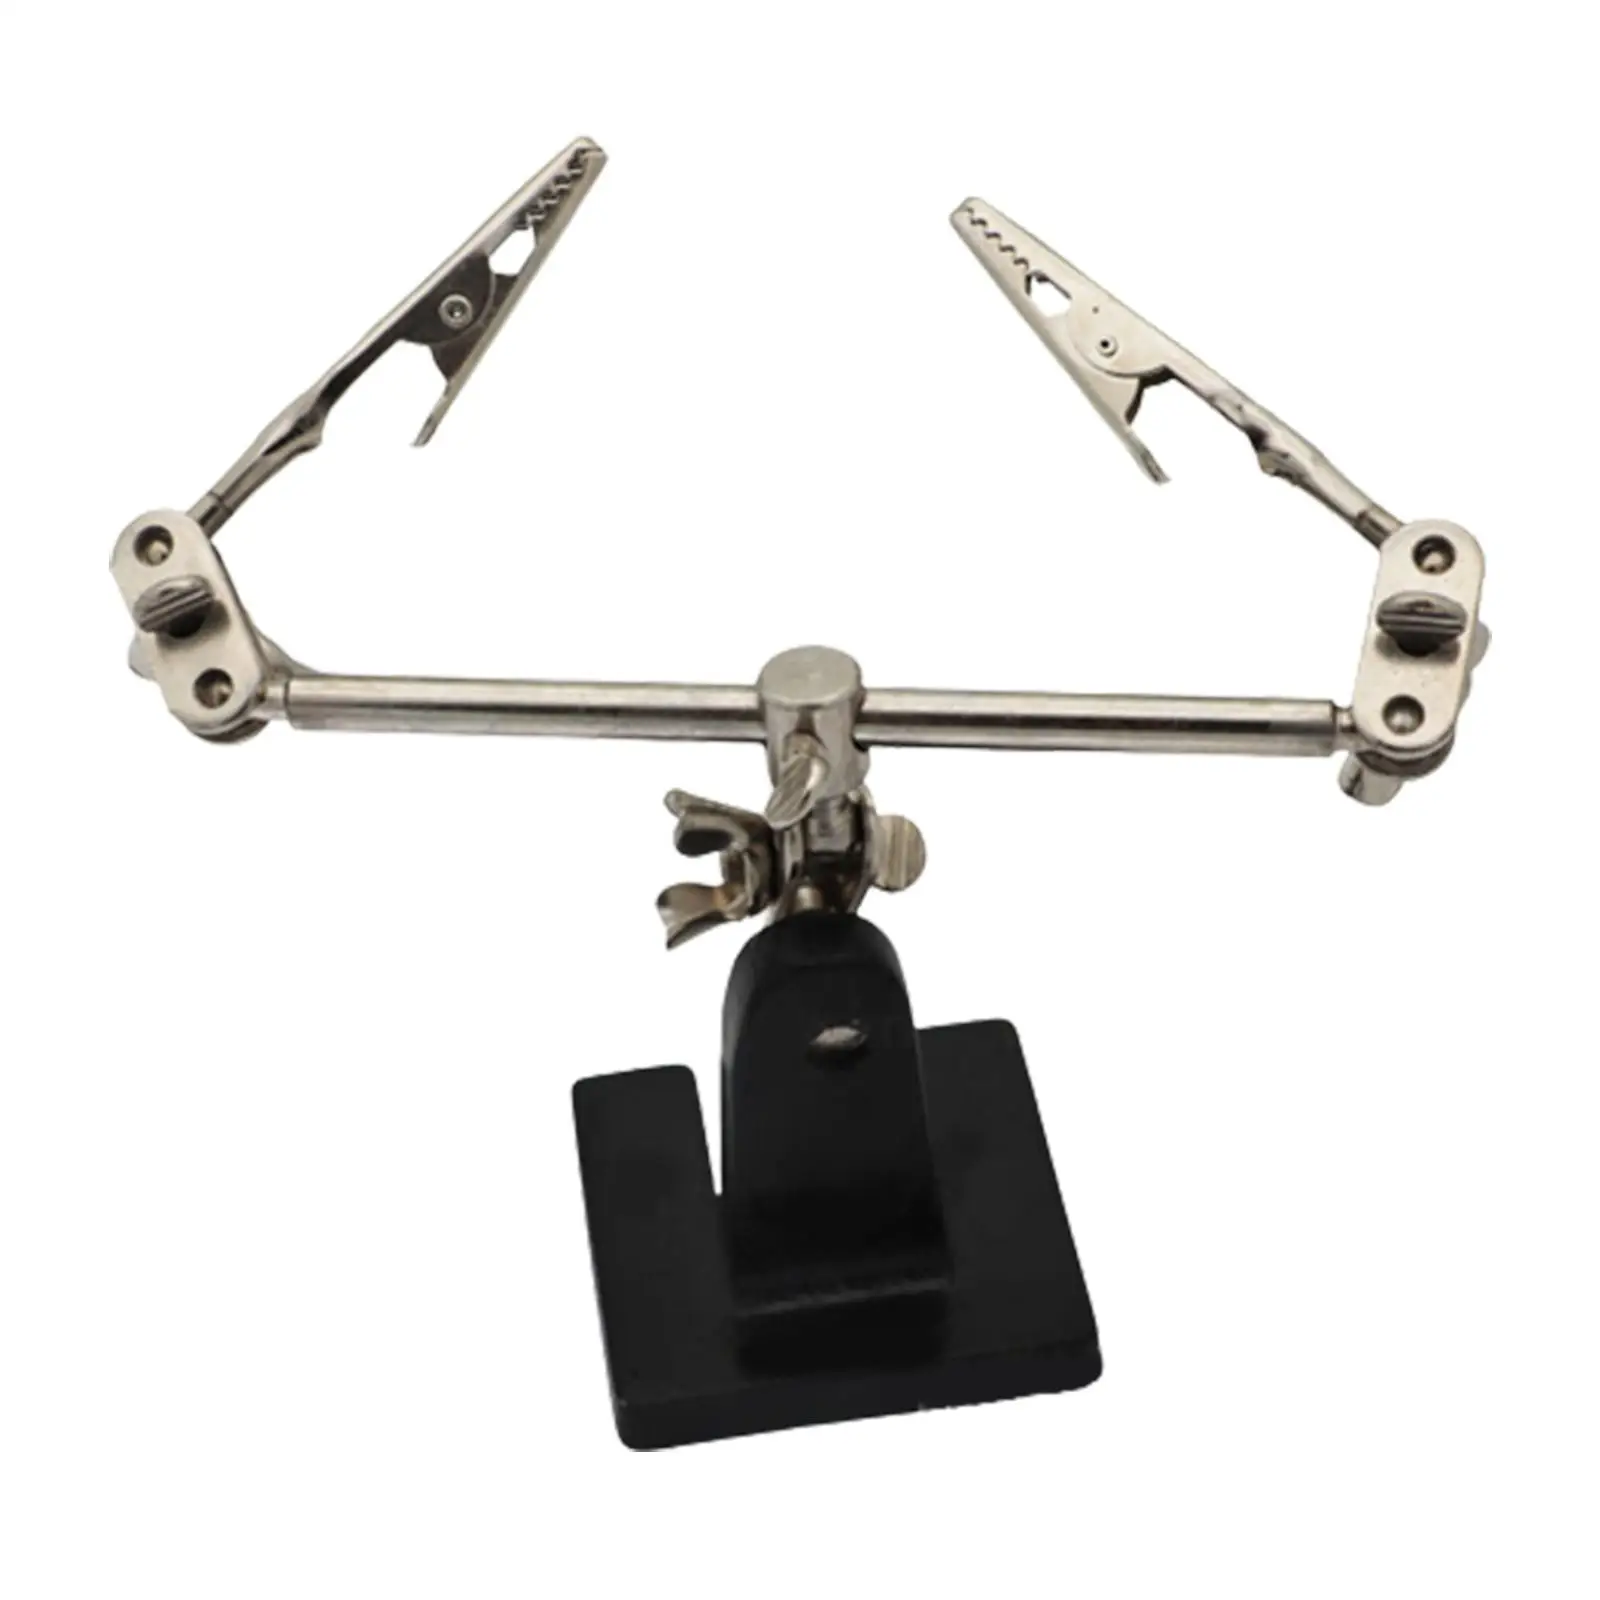 Soldering Third Hand PCB Circuit Board Holder Stand Clamp Helping Hands Fixed Clip for Assembly Soldering Station Repair Jewelry